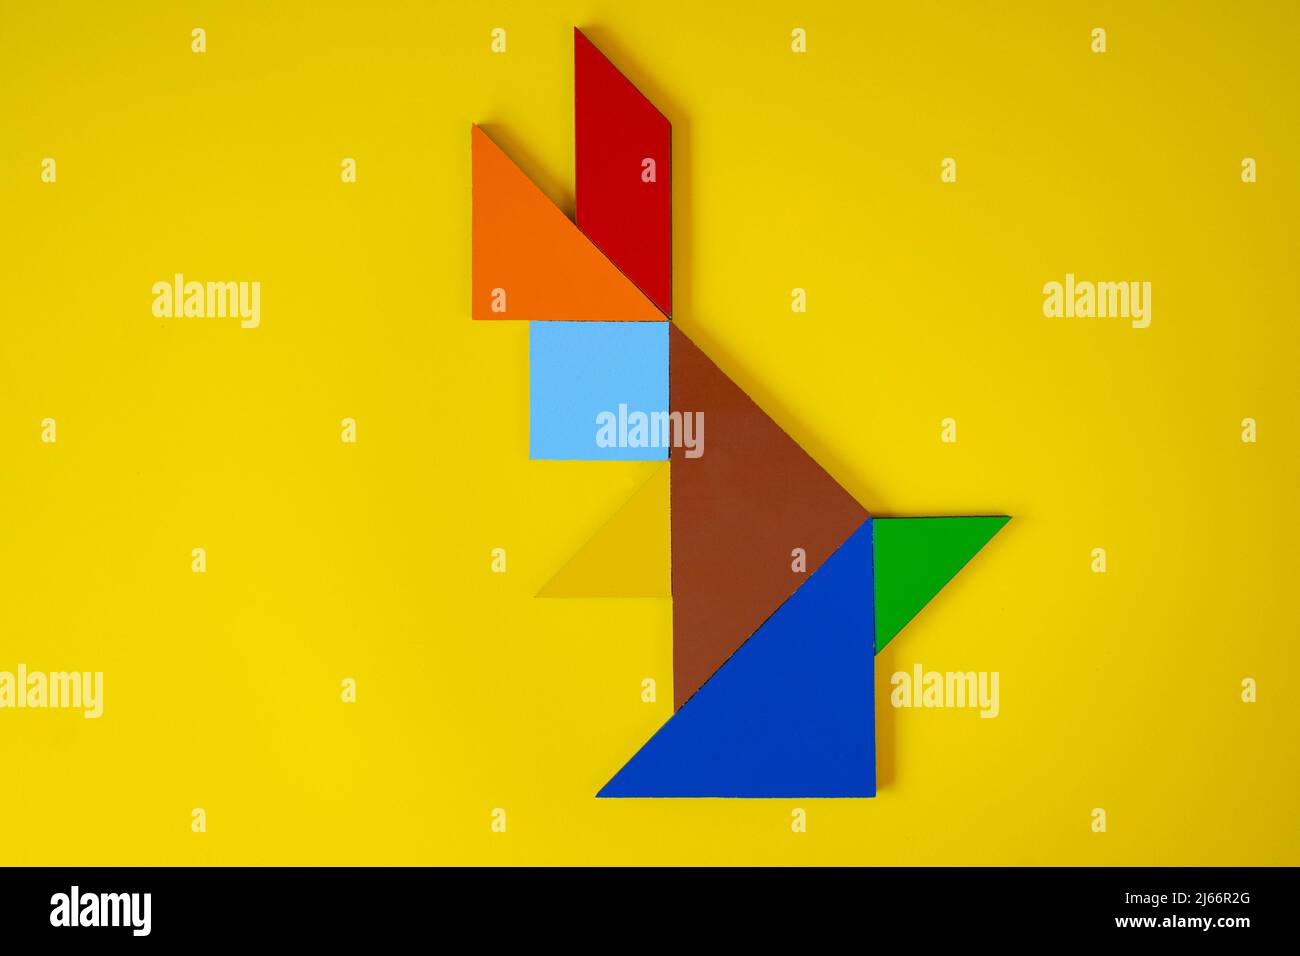 Tangram rabbit, top view of tangram animal rabbit, lay down, isolated on yellow background, colorful tangram puzzle toy concept Stock Photo